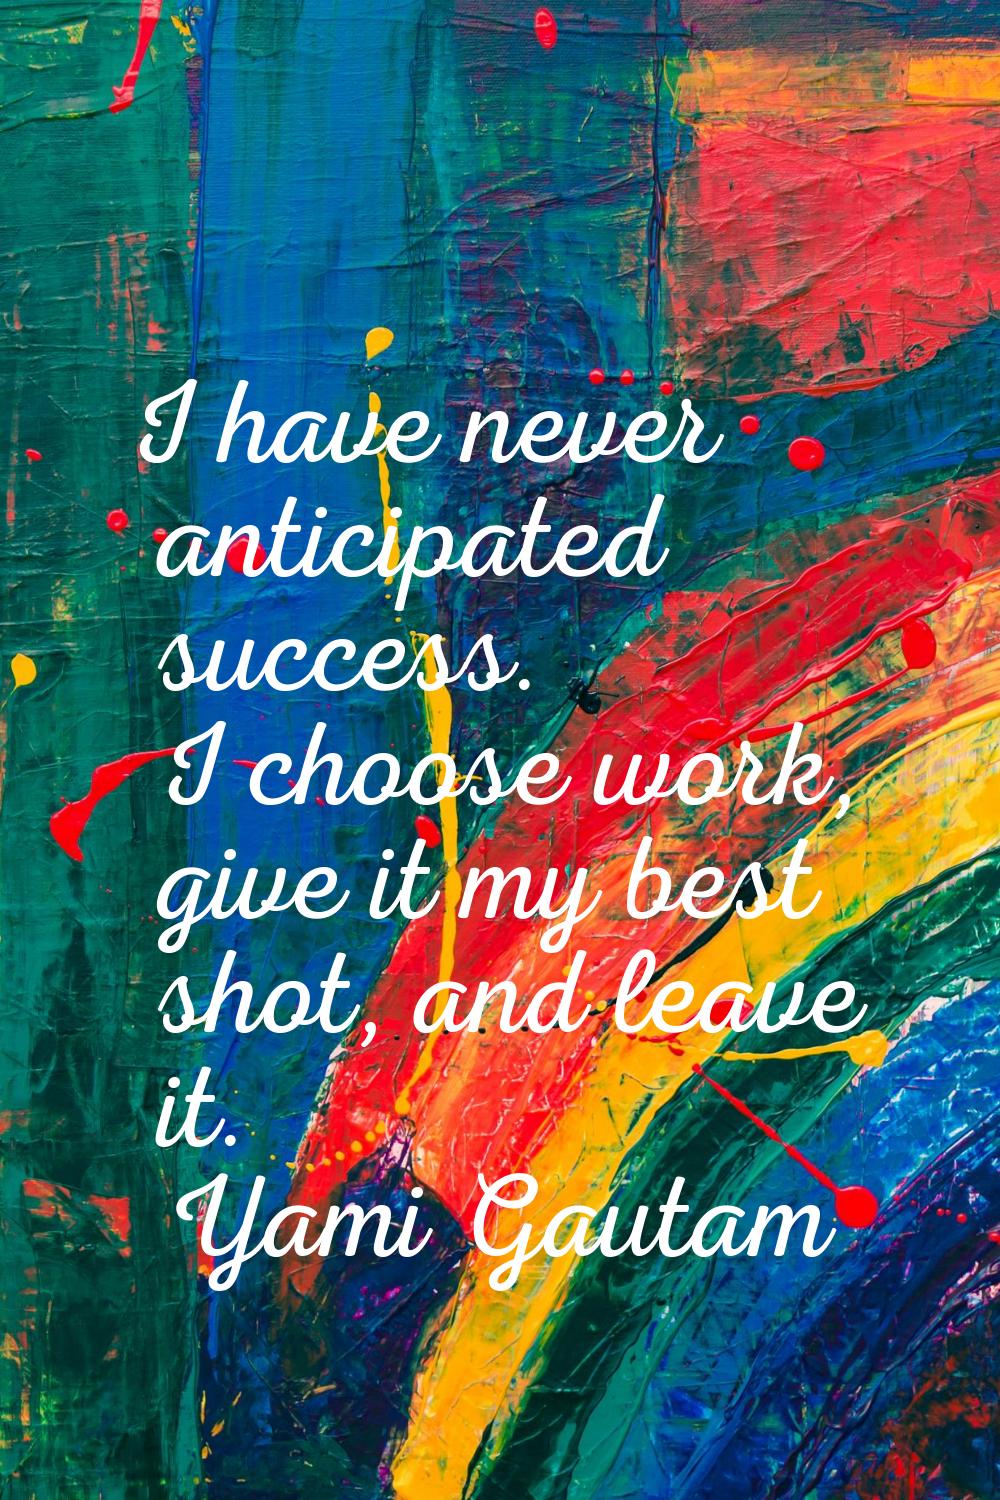 I have never anticipated success. I choose work, give it my best shot, and leave it.